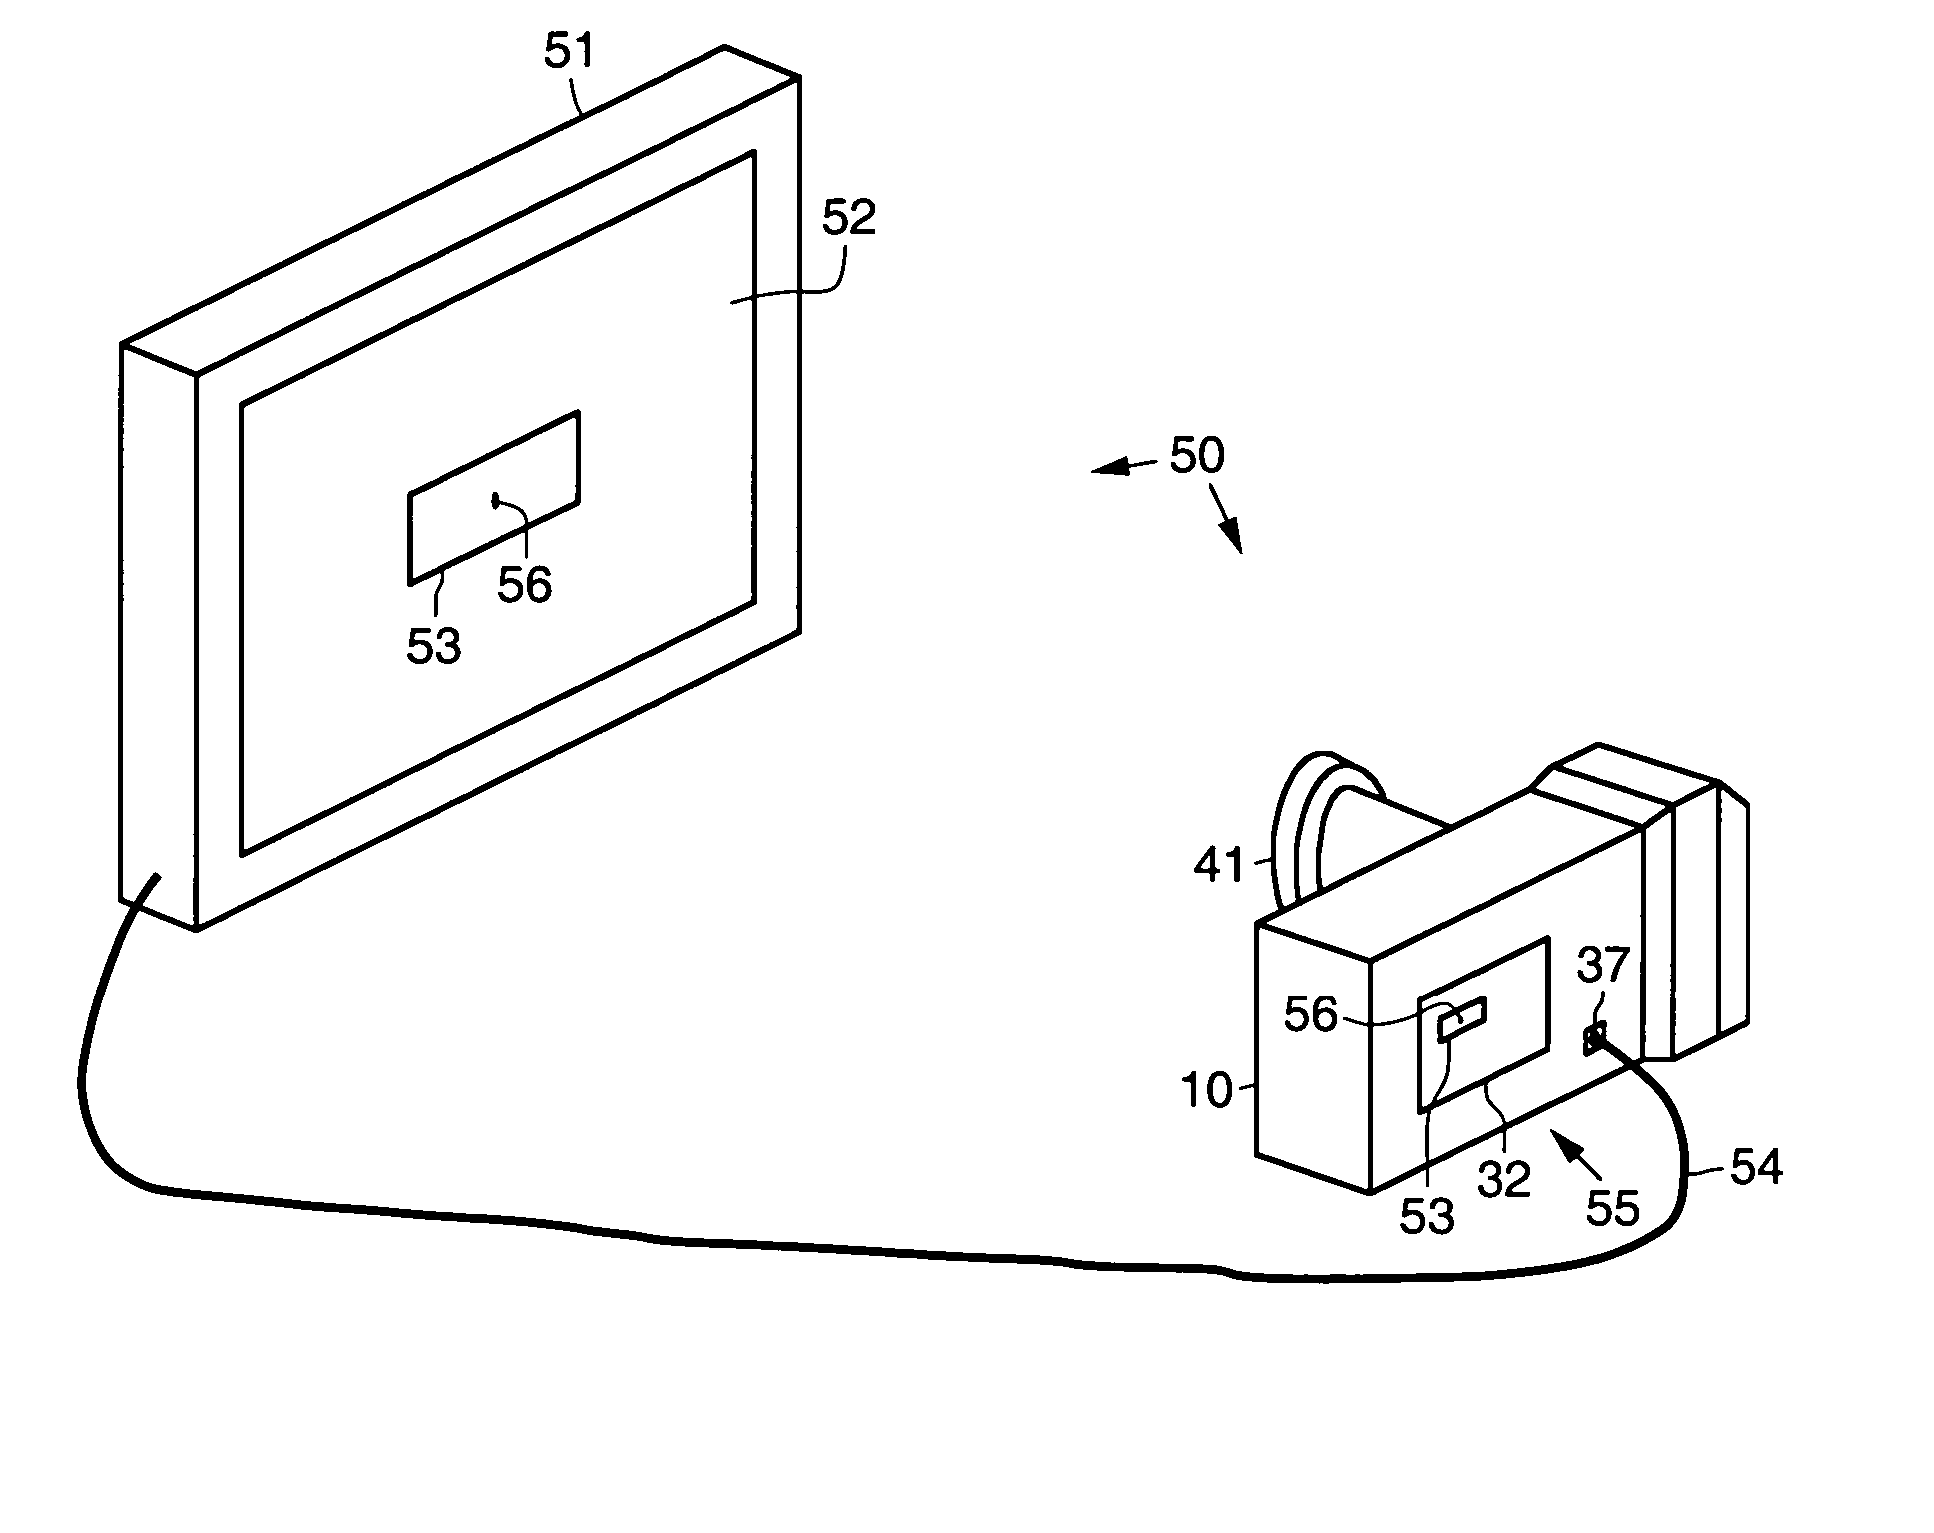 Digital camera system and method for maximizing television viewing area